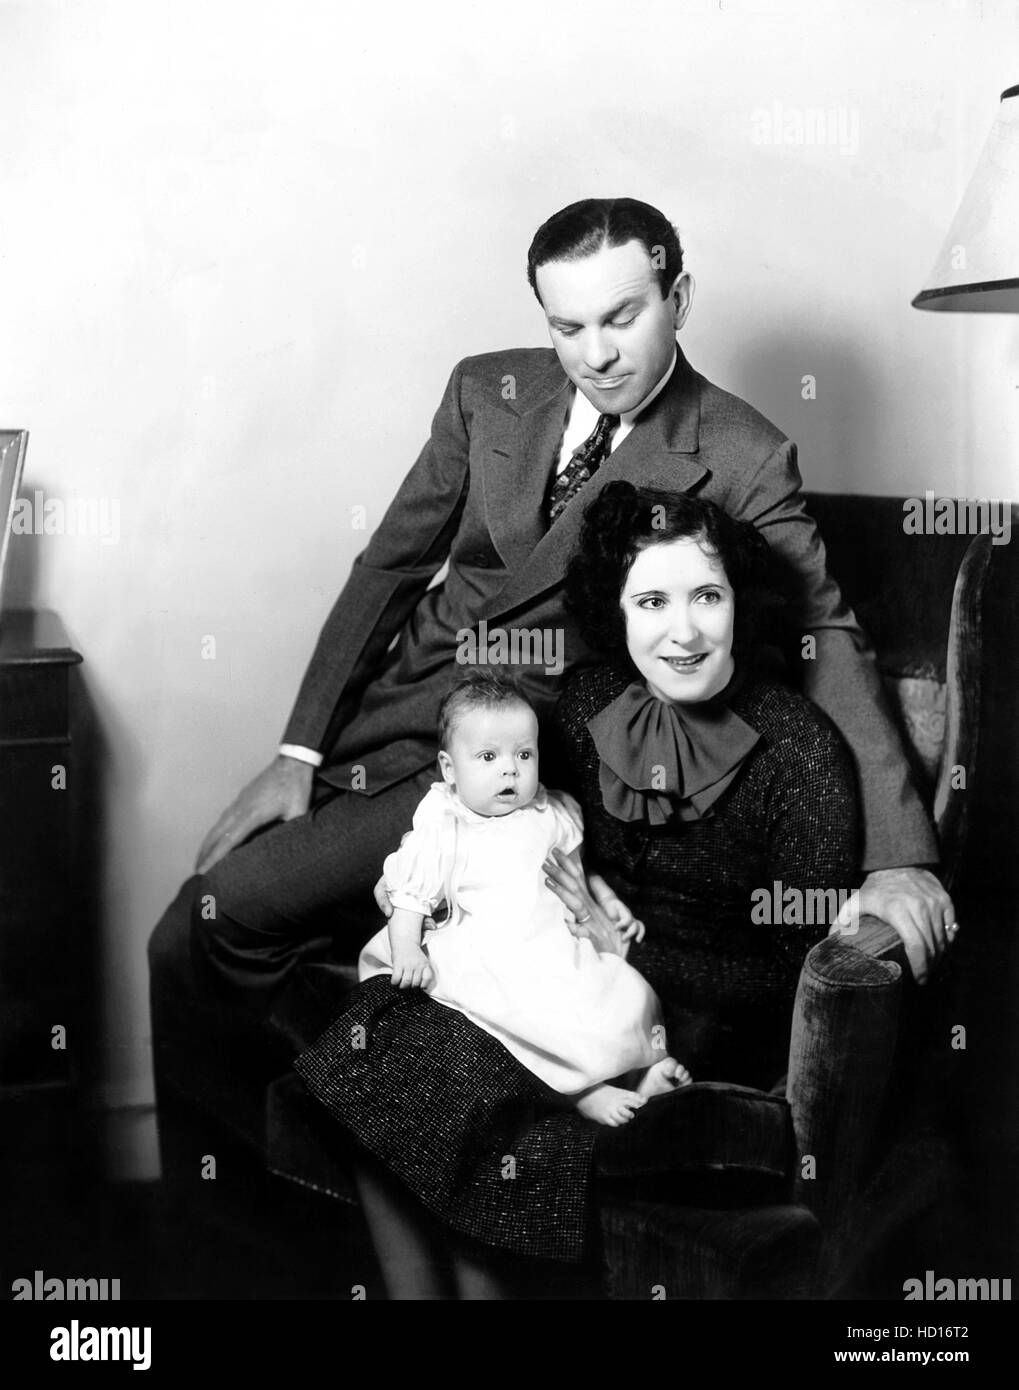 George Burns and Gracie Allen, with their daughter, Sandra Burns, 1935 ...